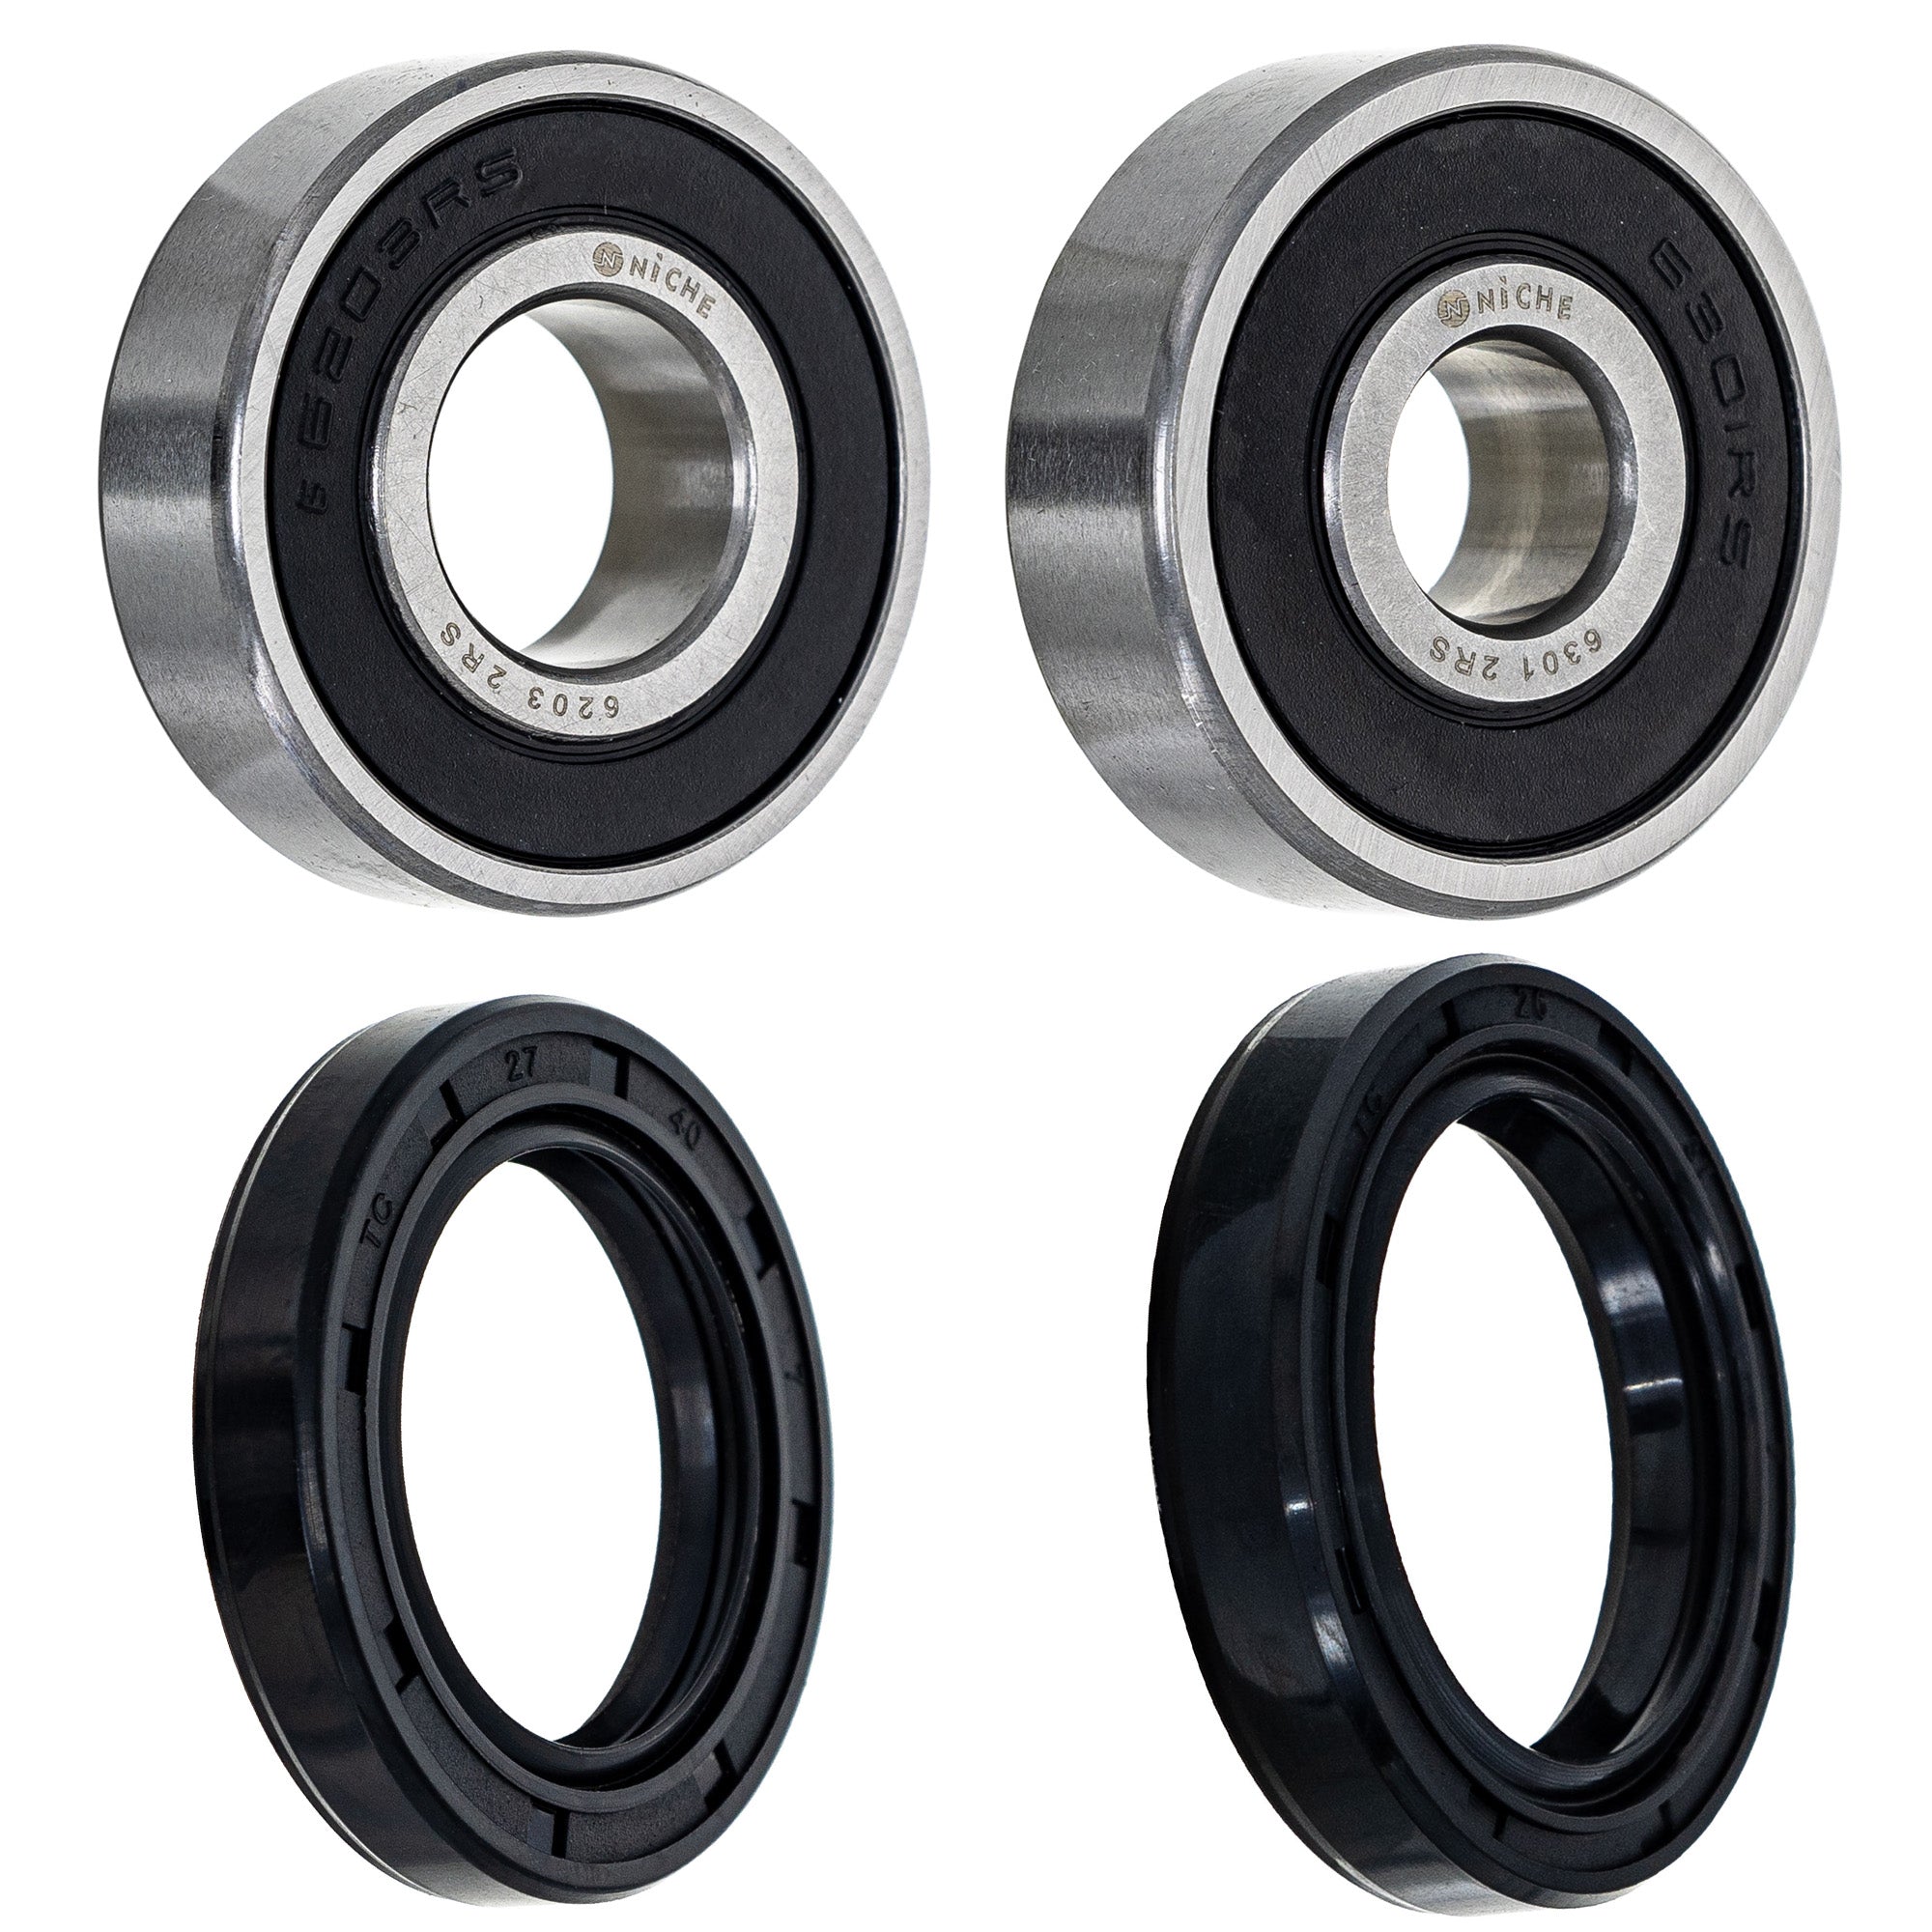 Wheel Bearing Seal Kit for zOTHER Ref No Grom NICHE MK1008847